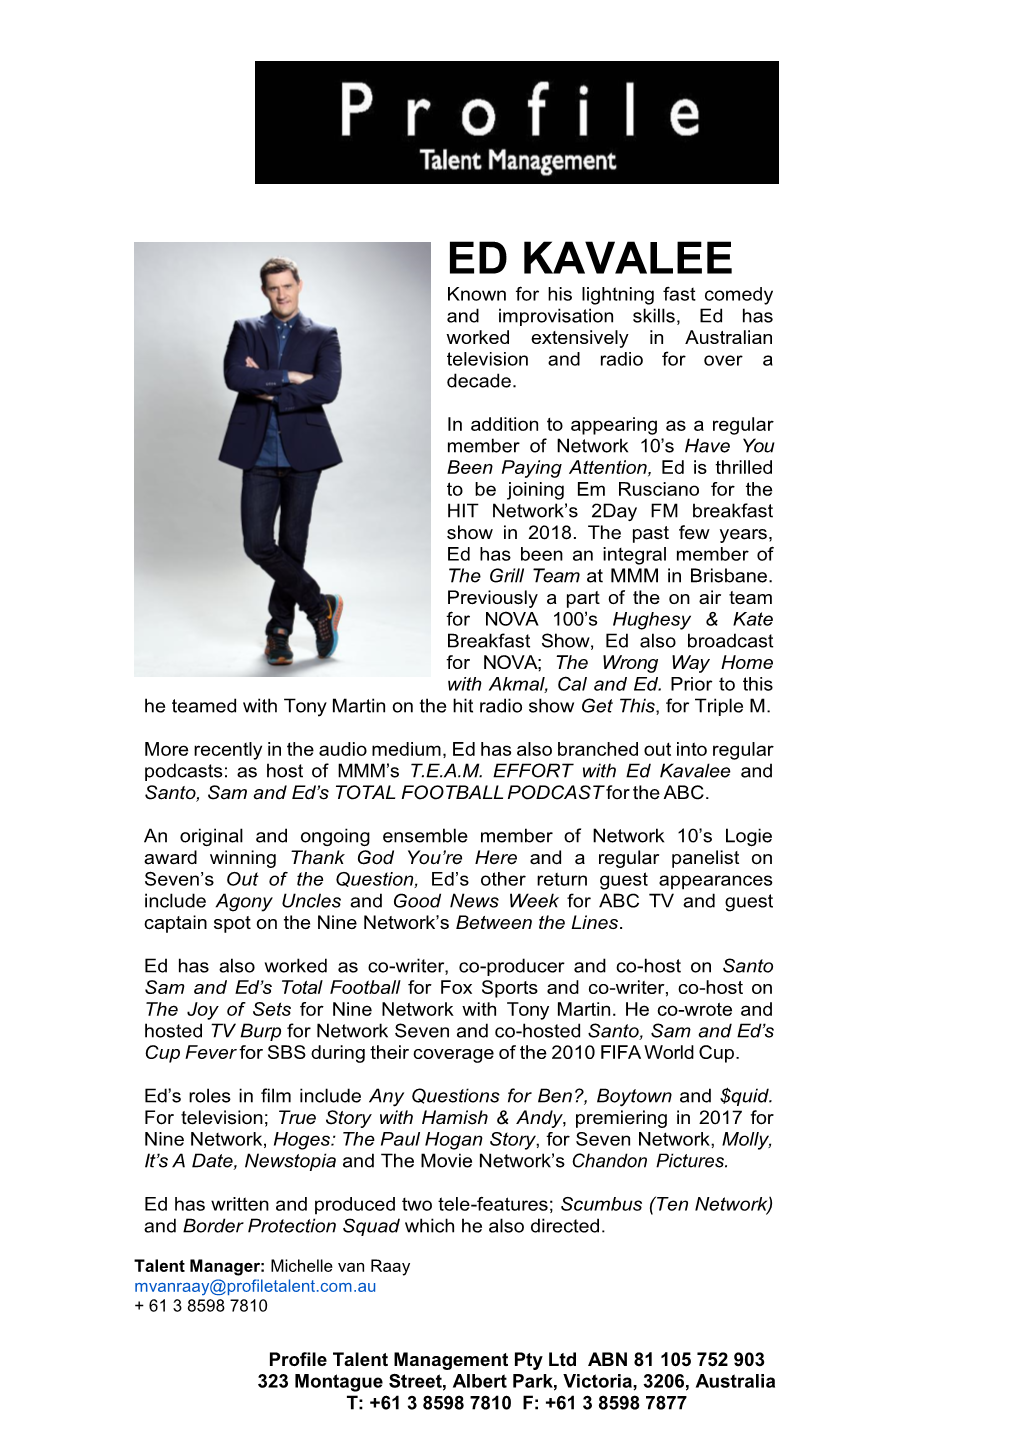 ED KAVALEE Known for His Lightning Fast Comedy and Improvisation Skills, Ed Has Worked Extensively in Australian Television and Radio for Over a Decade